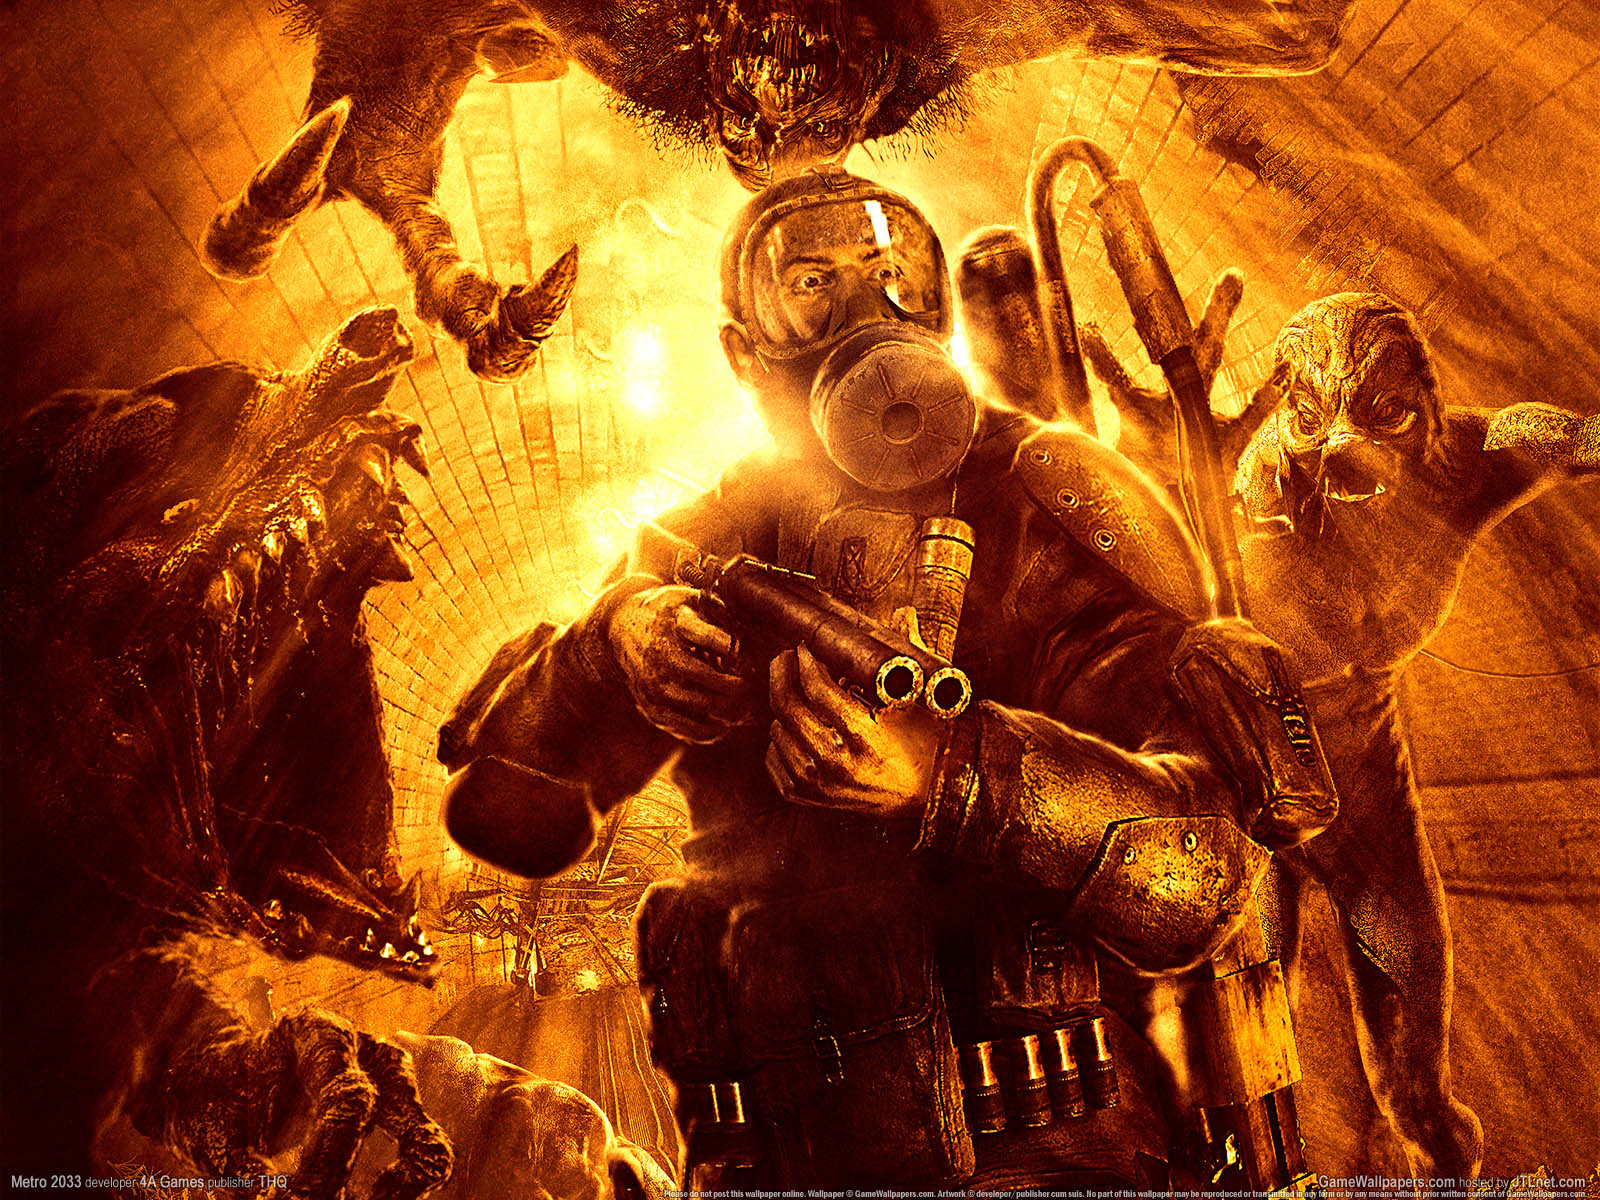 metro 2033 wallpaper,action adventure game,fictional character,action film,cg artwork,movie